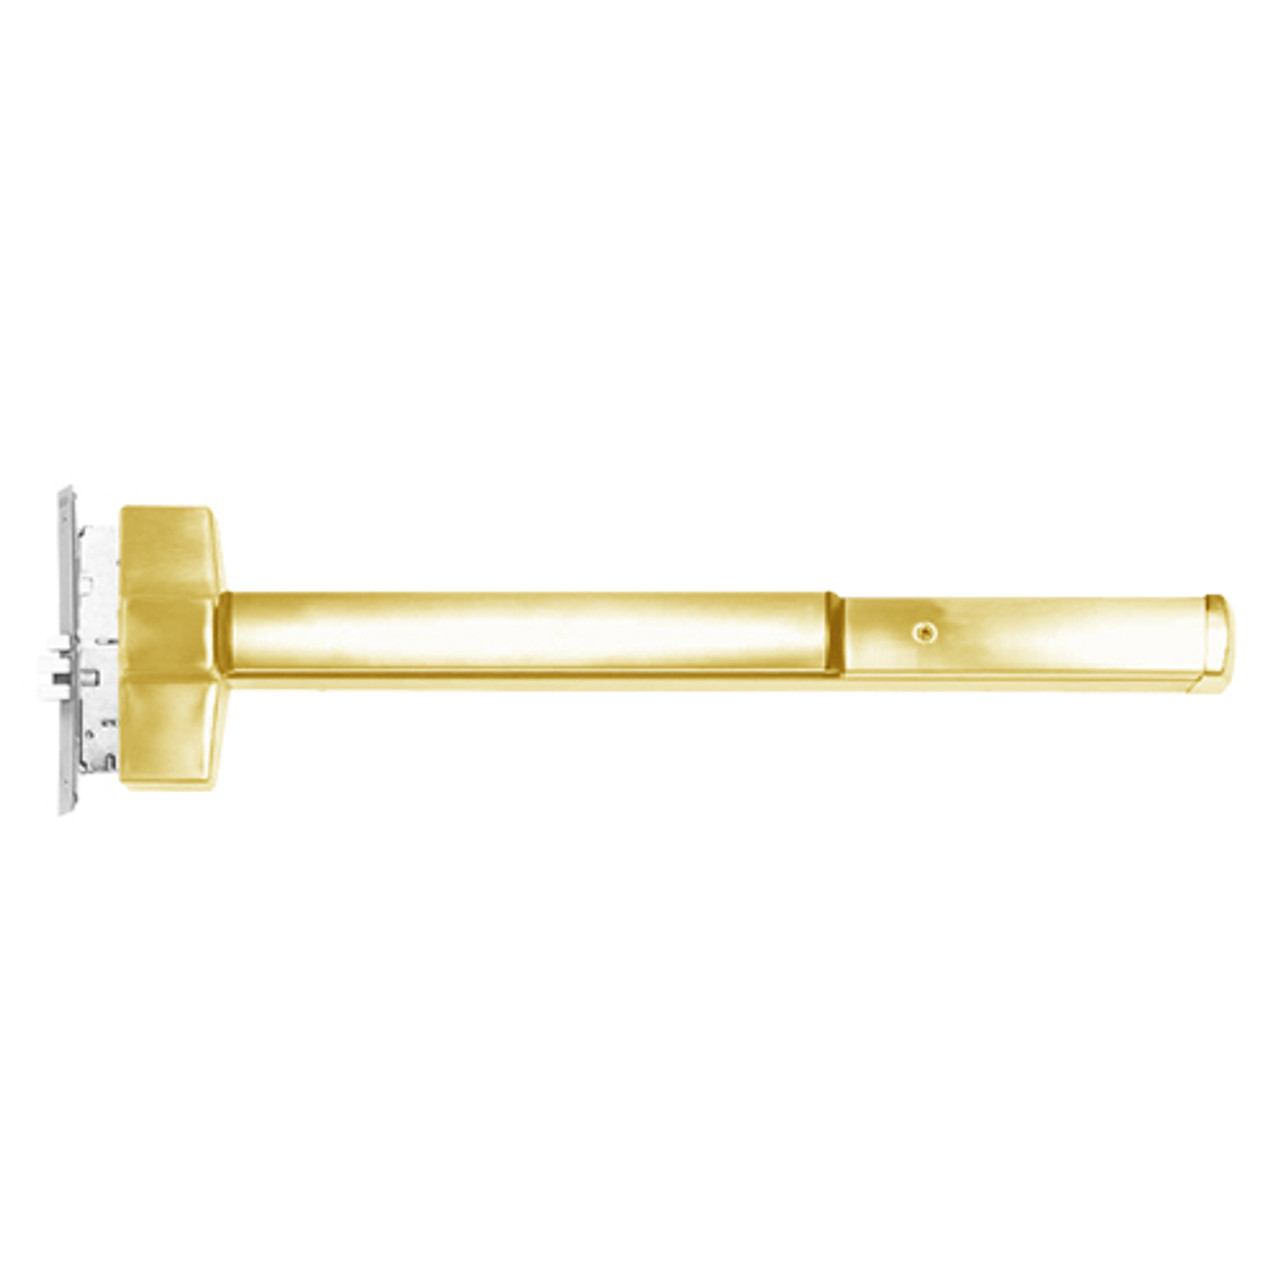 ED5600TD-605-RHR Corbin ED5600 Series Non Fire Rated Mortise Exit Device with Delayed Egress in Bright Brass Finish